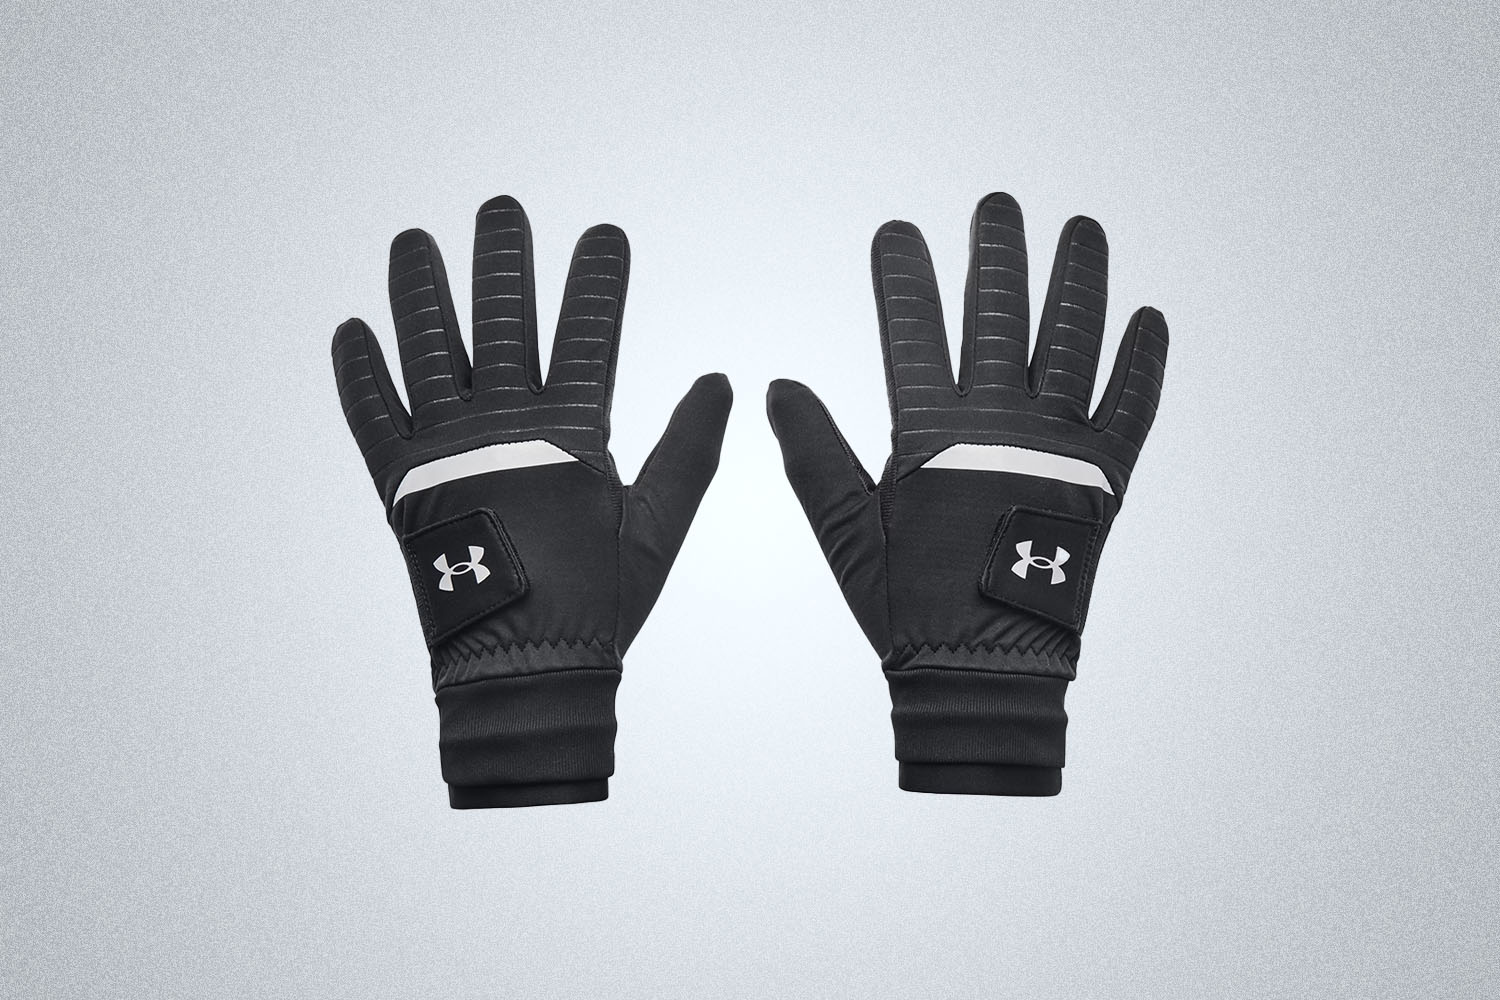 The Under Armour Men's ColdGear Infrared Golf Gloves on a gray background.